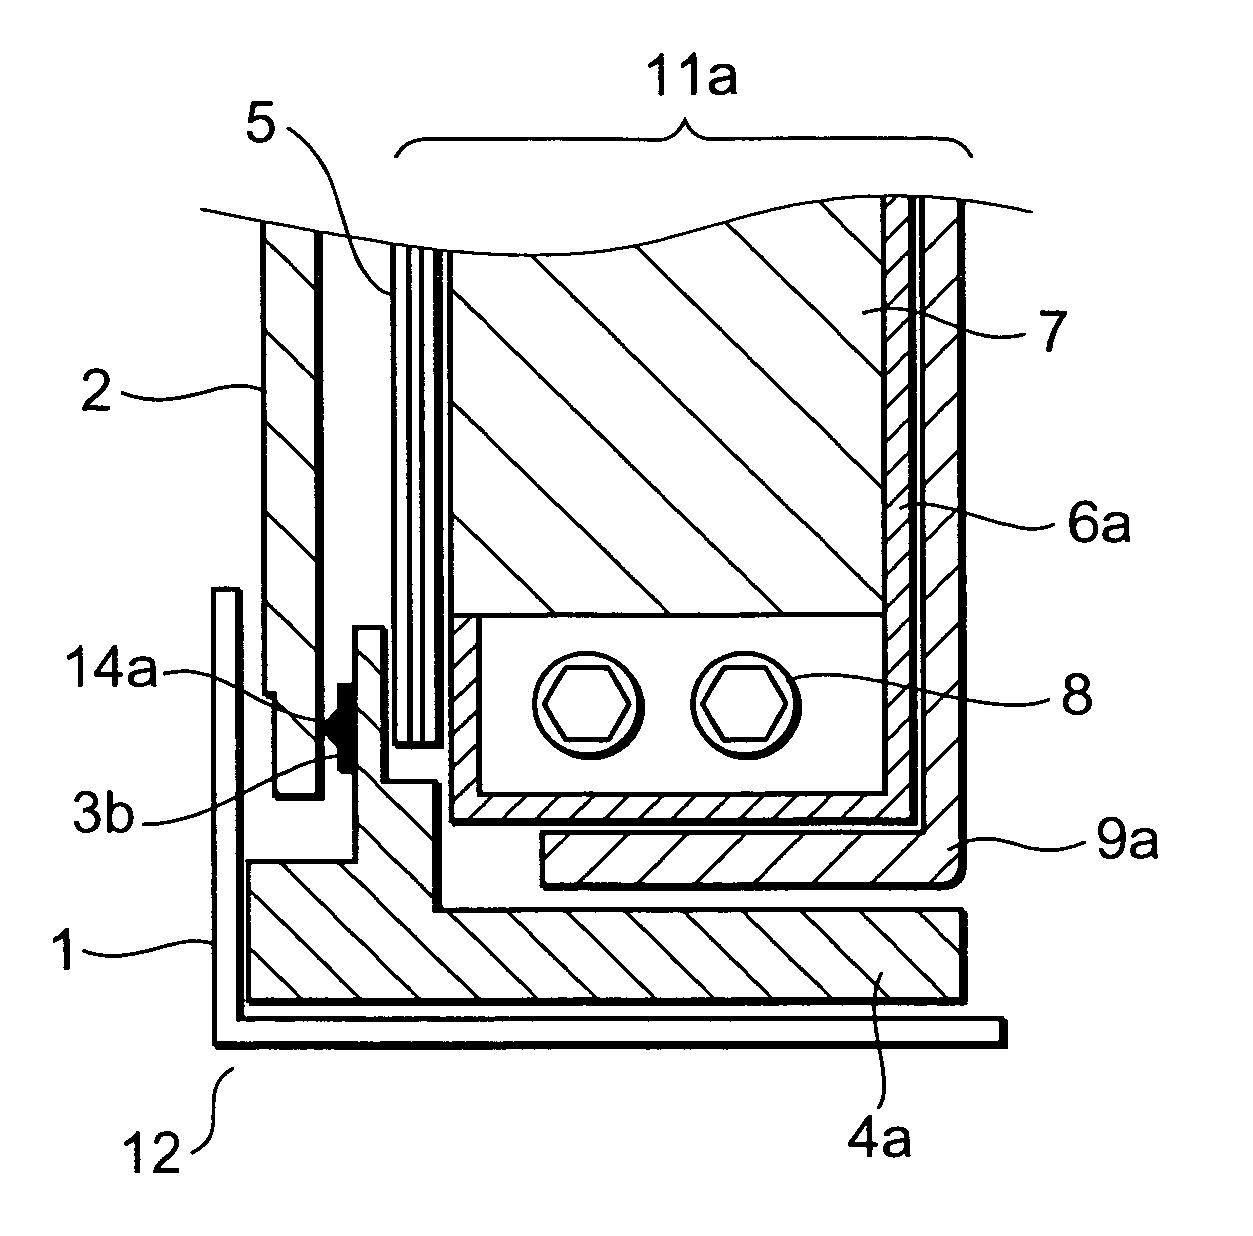 Liquid crystal display module and back light for the same